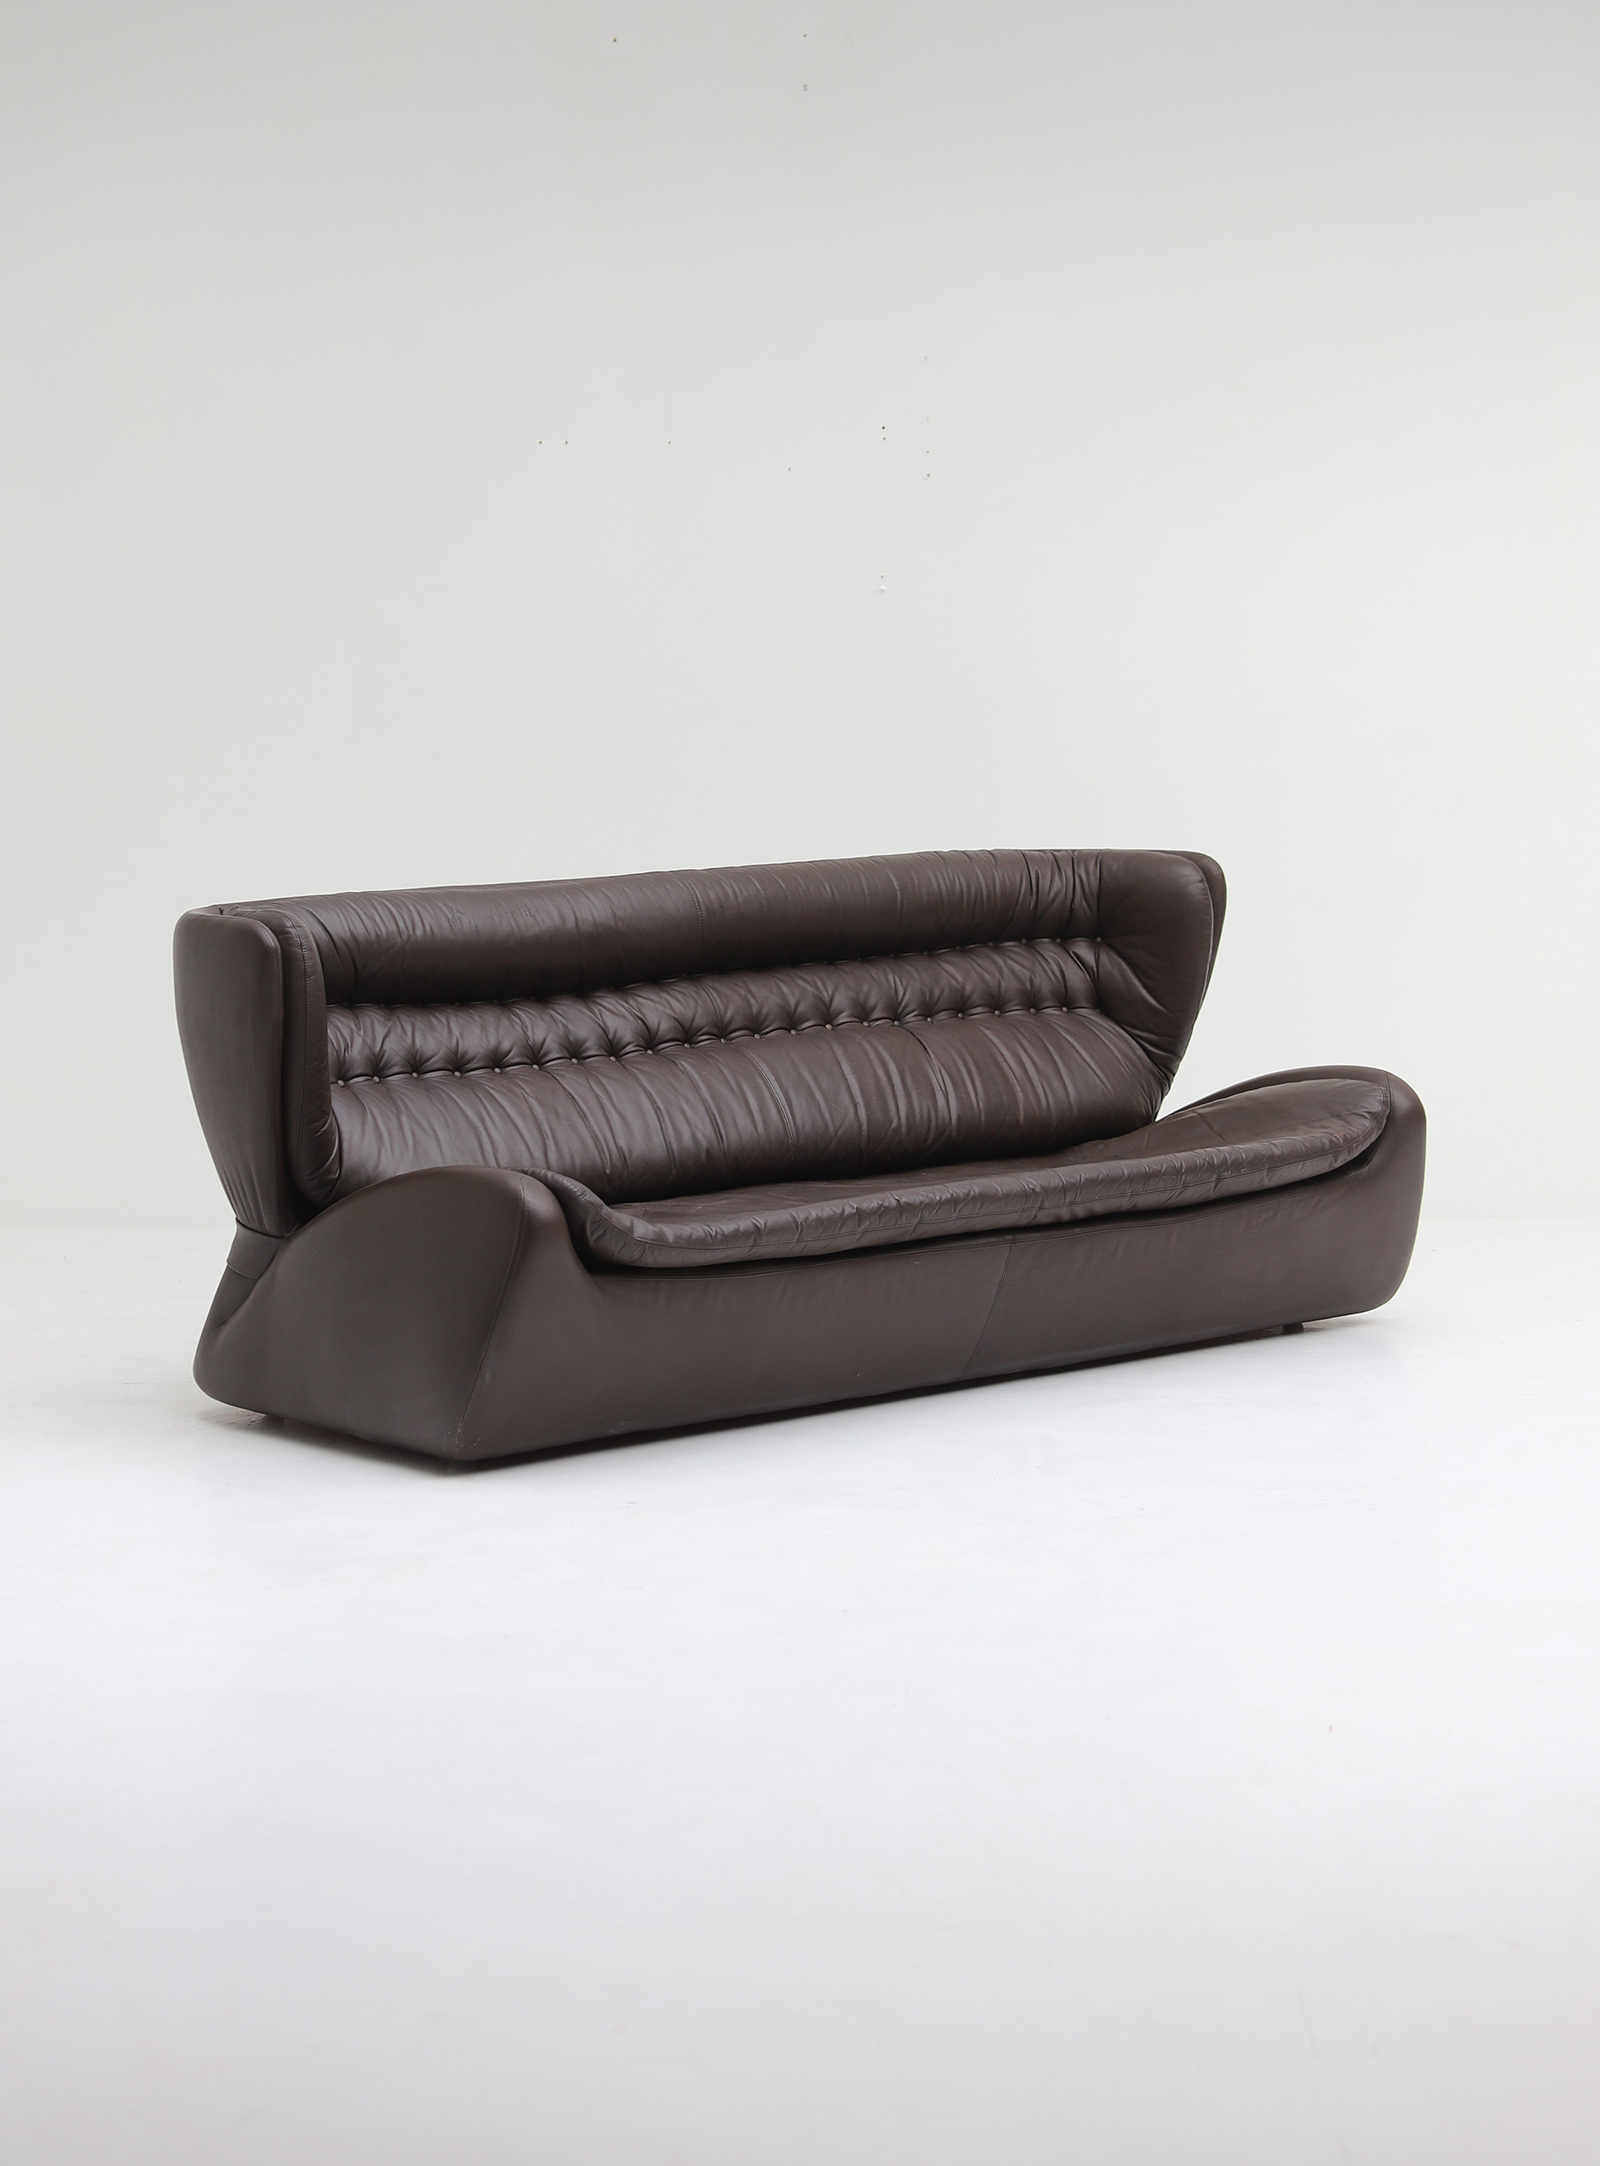 Durlet Brown Leather 'Pacha' Sofa 1970s Space Age image 1